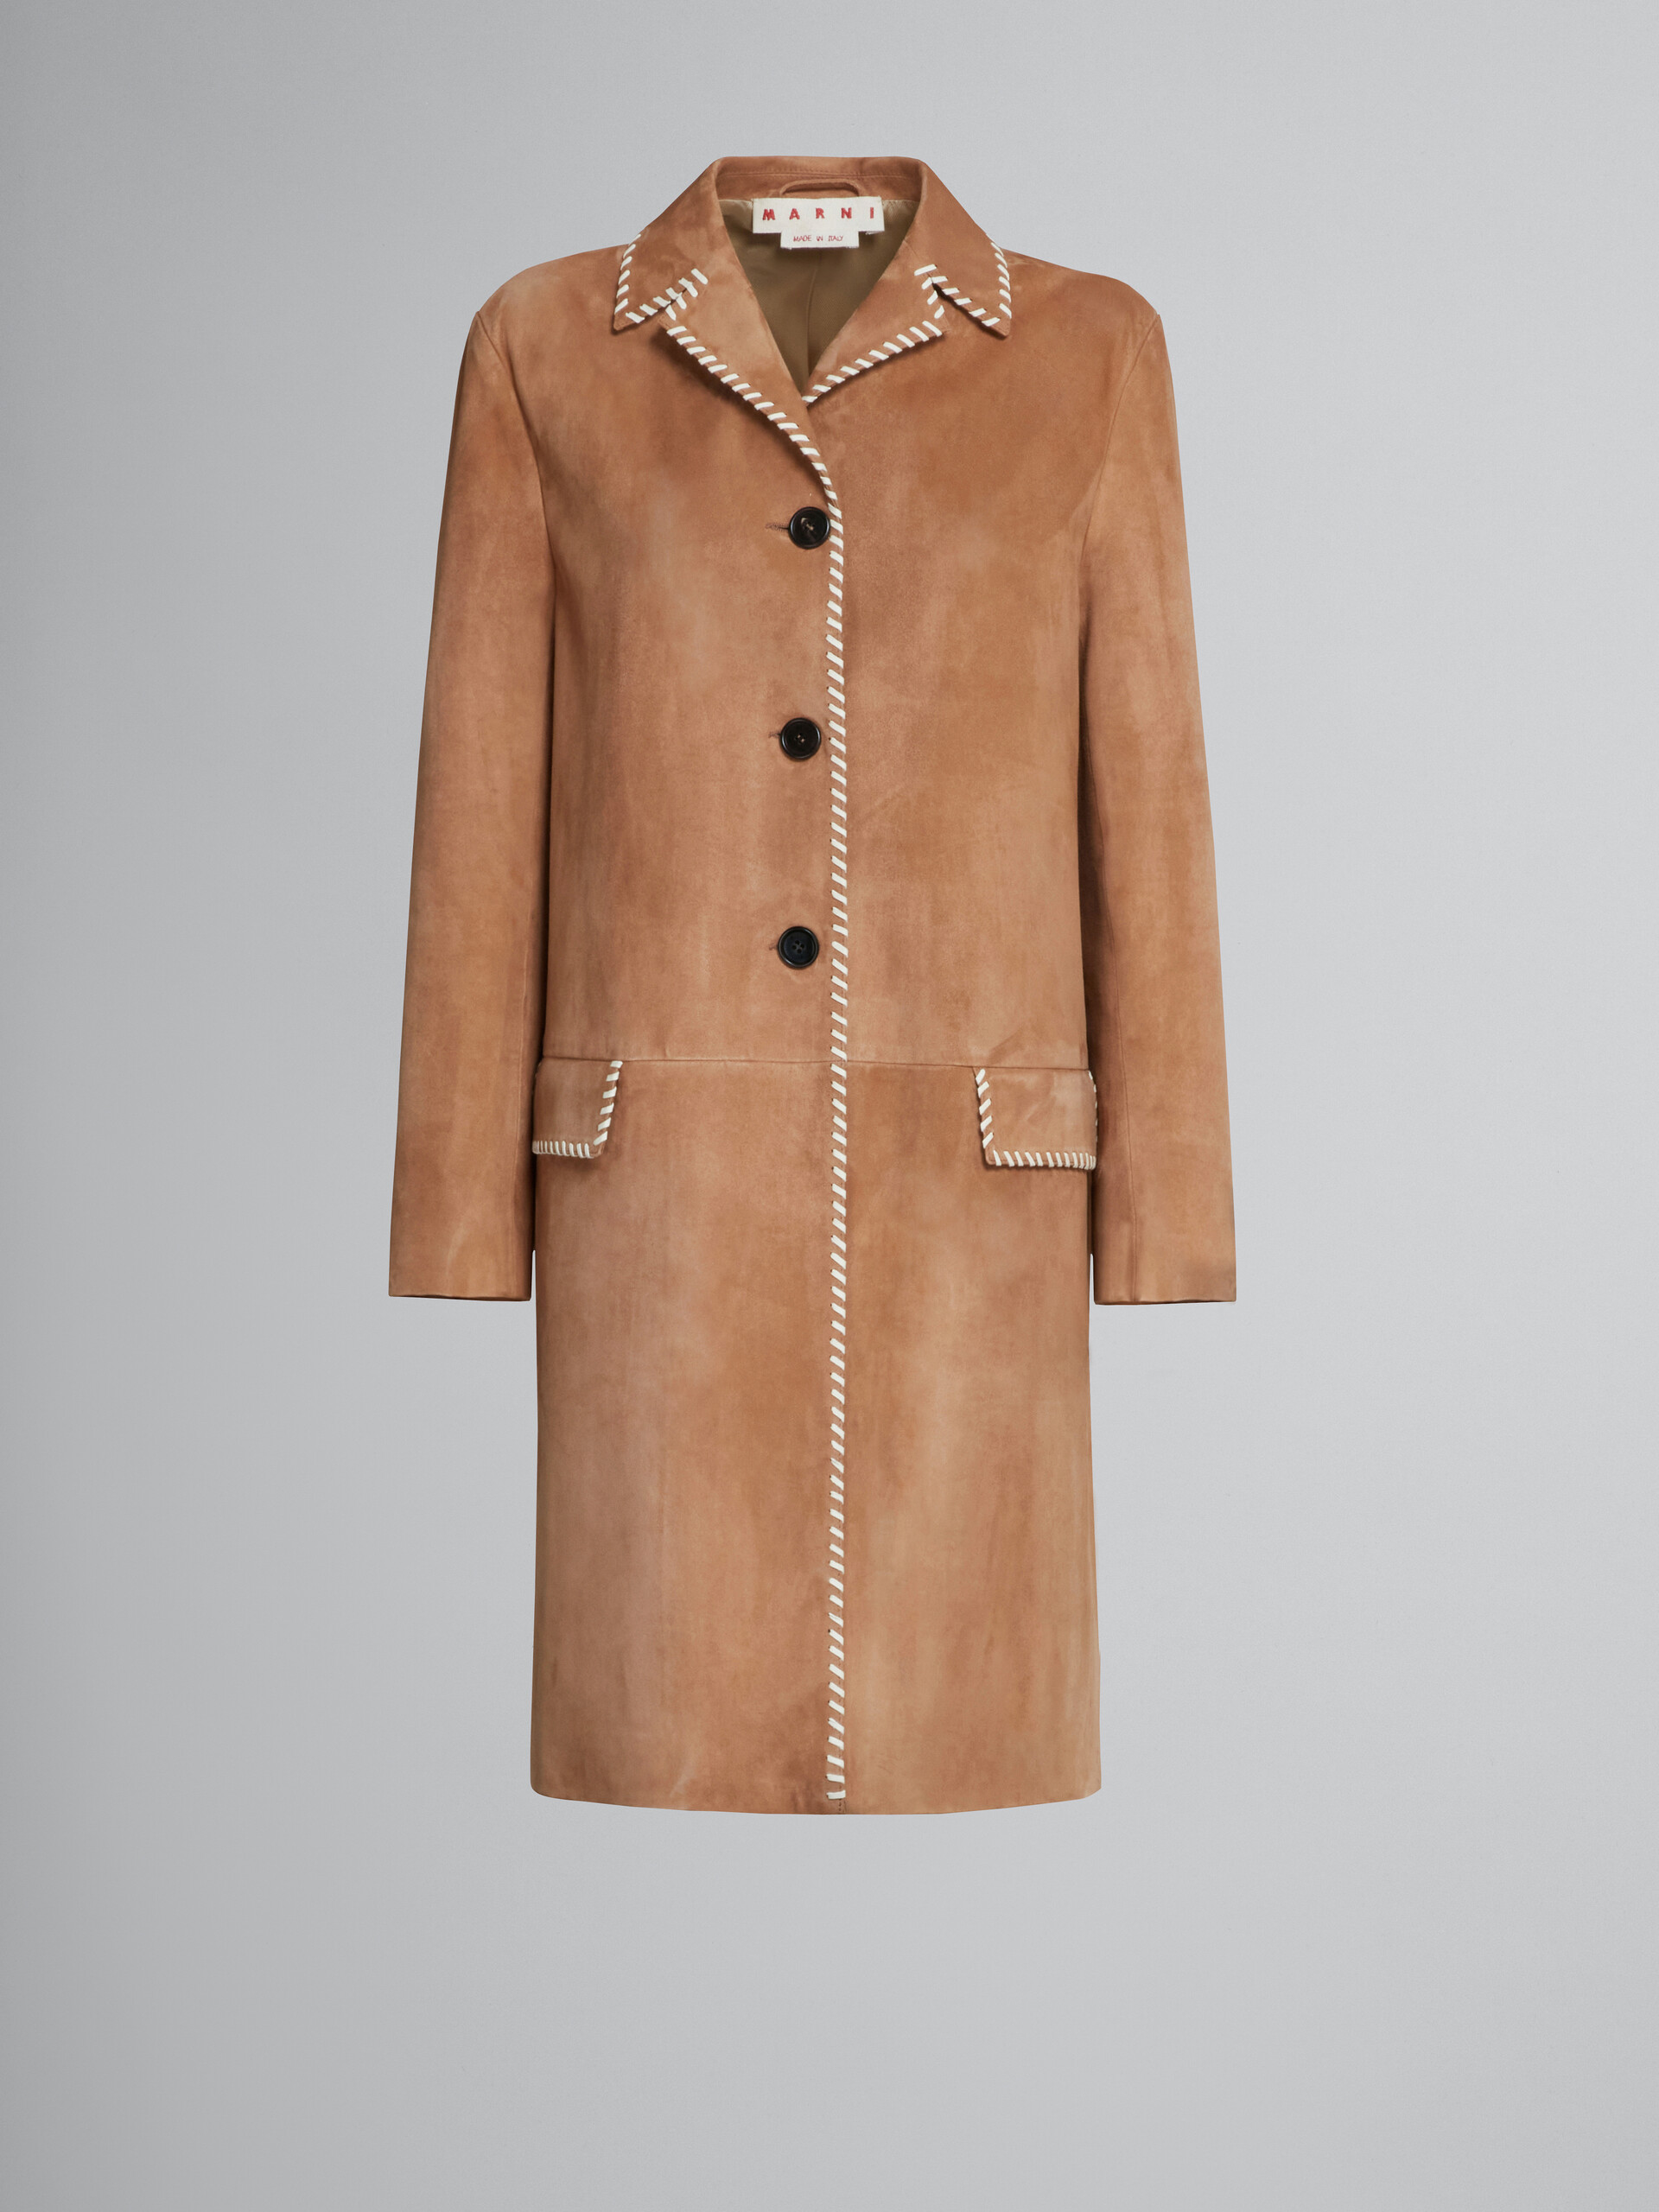 Brown suede coat with nappa stitching - Coat - Image 1